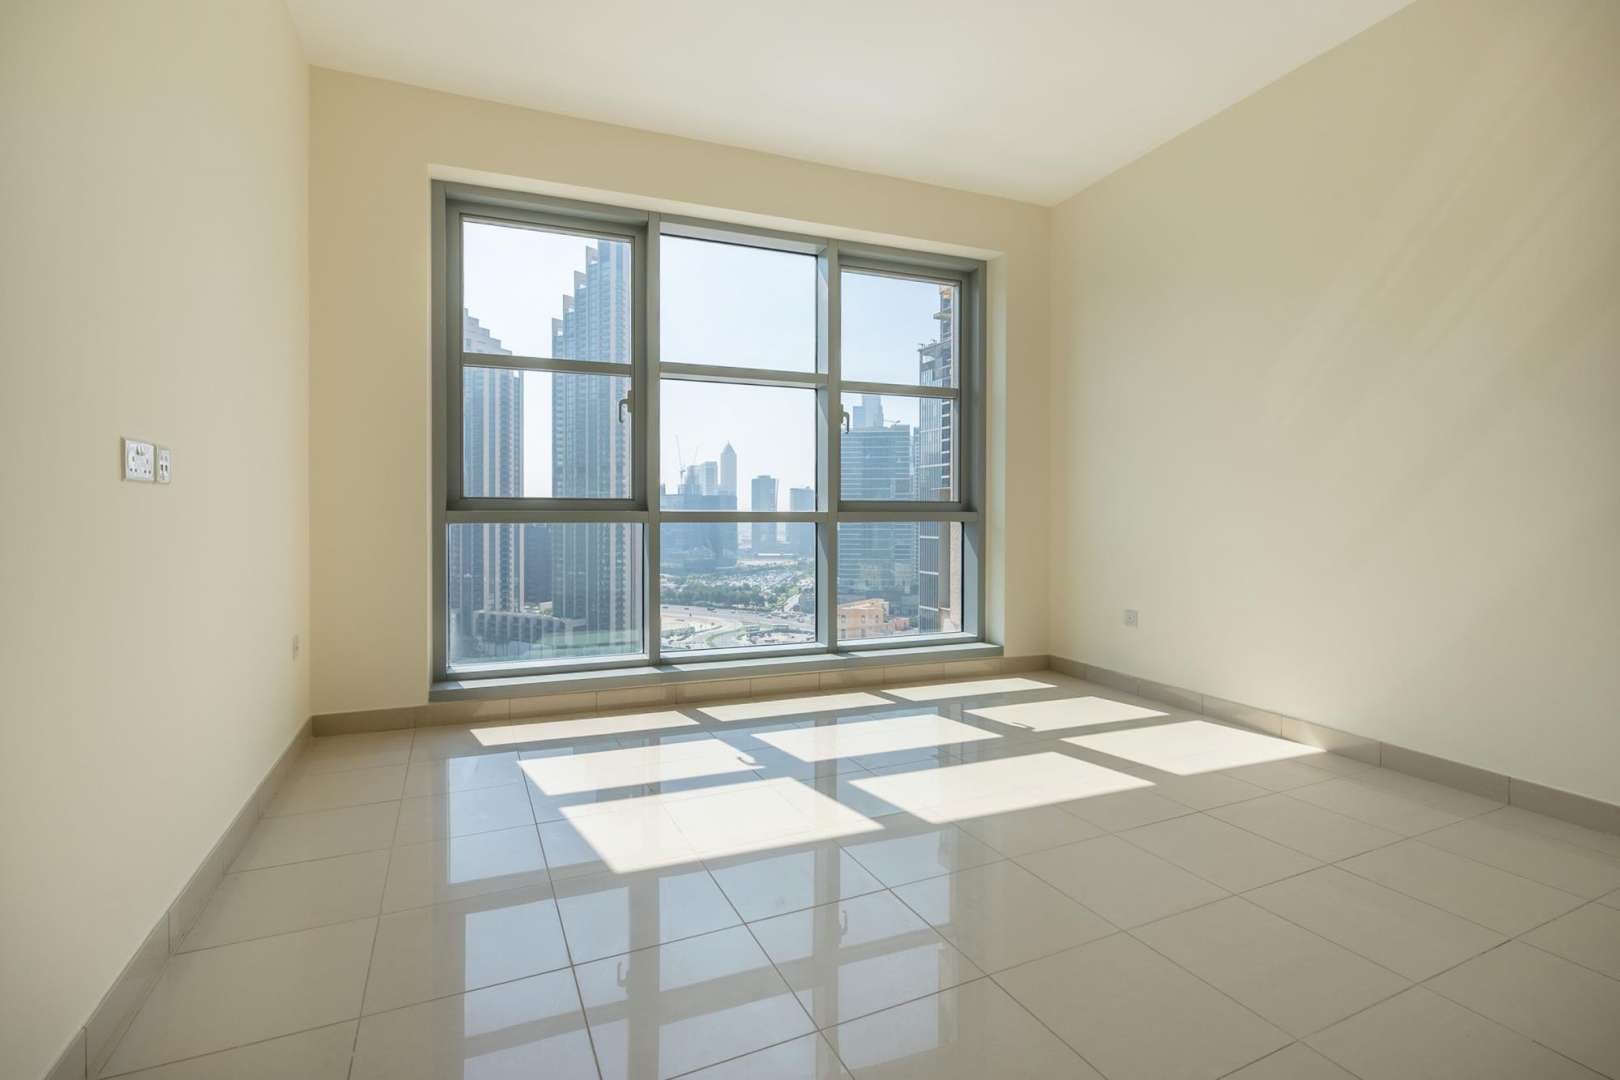 1 Bedroom Apartment For Rent Standpoint Tower A Lp05154 2b7ebb5297bfc000.jpg